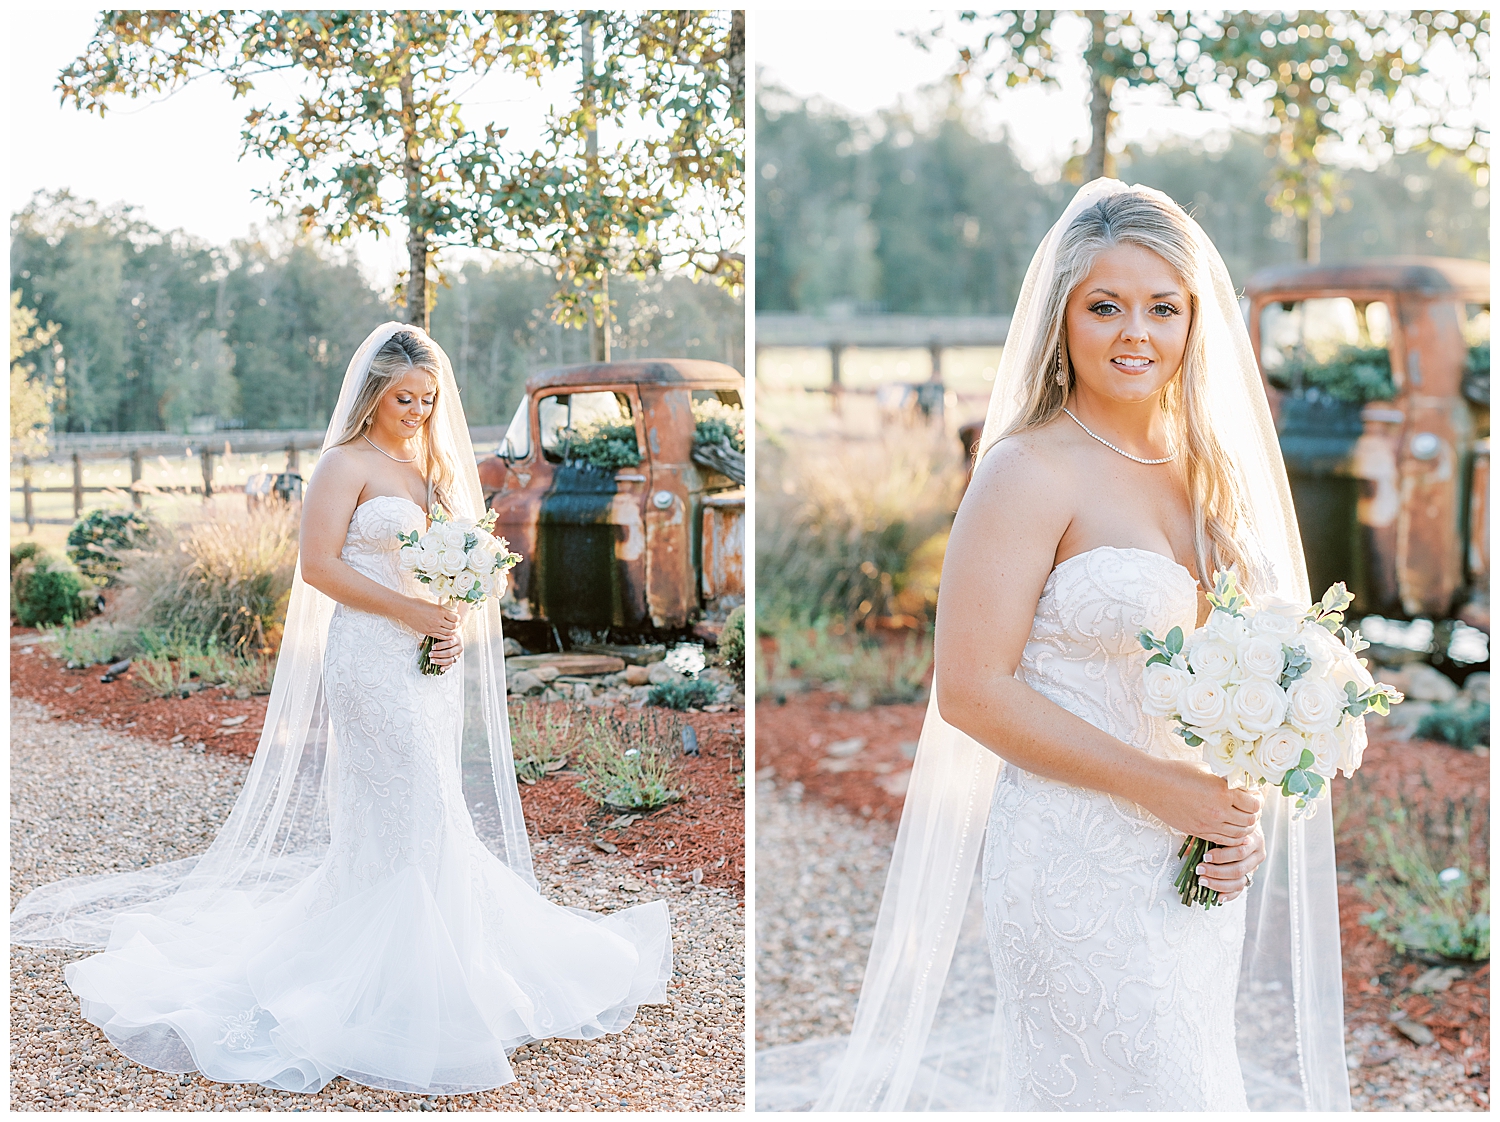 A bride smiles down at her bouquet while standing in front of a rustic truck.